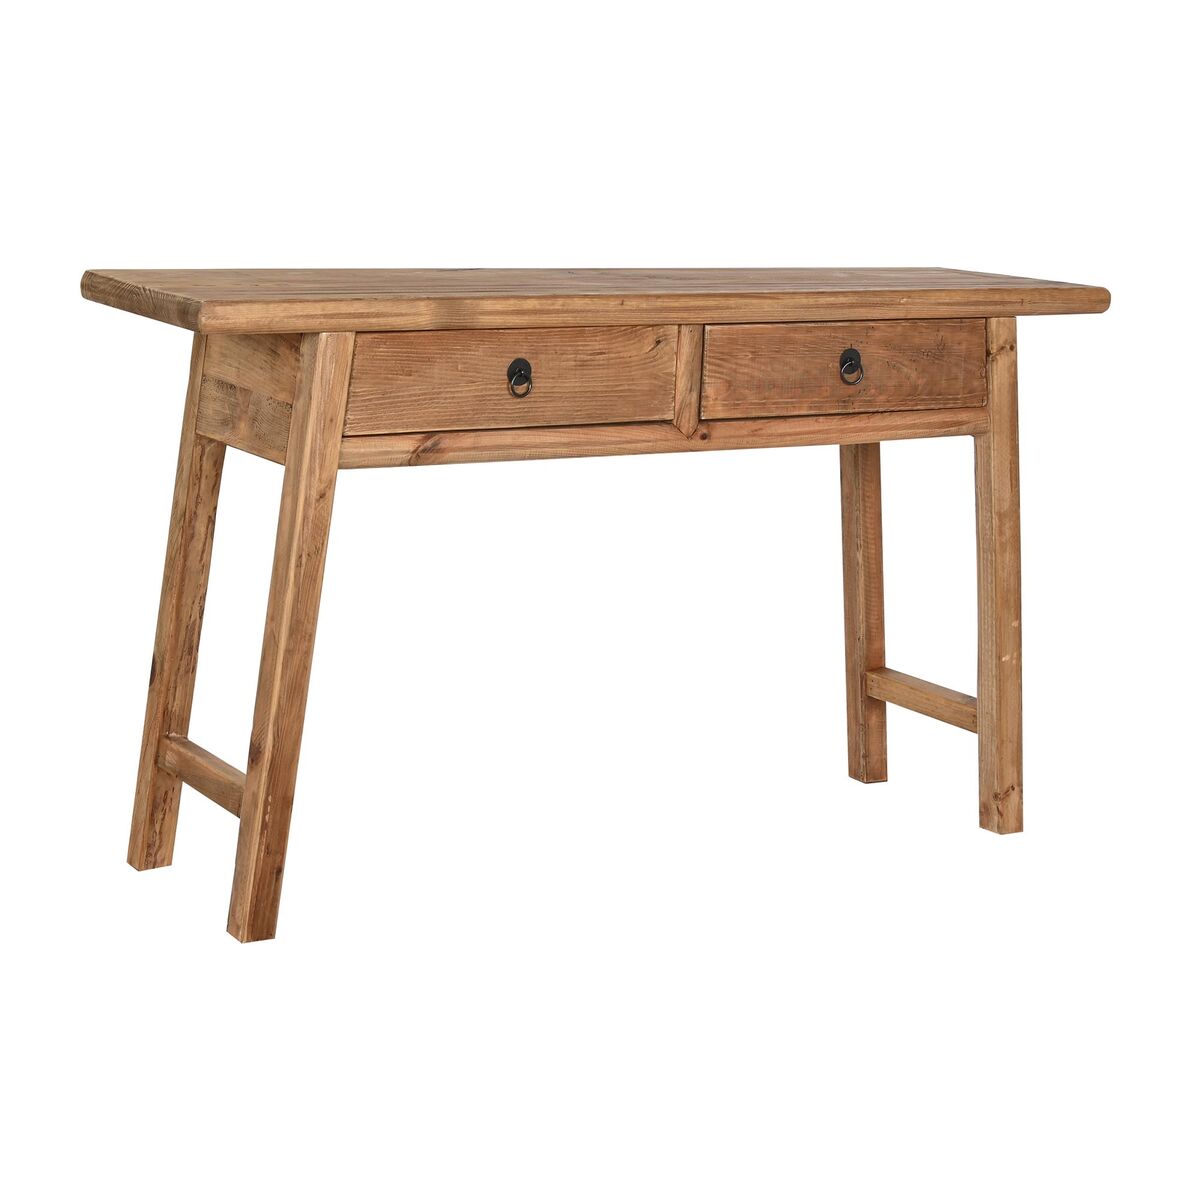 Console DKD Home Decor Natural Wood Pinewood Recycled Wood 140 x 38 x 80 cm